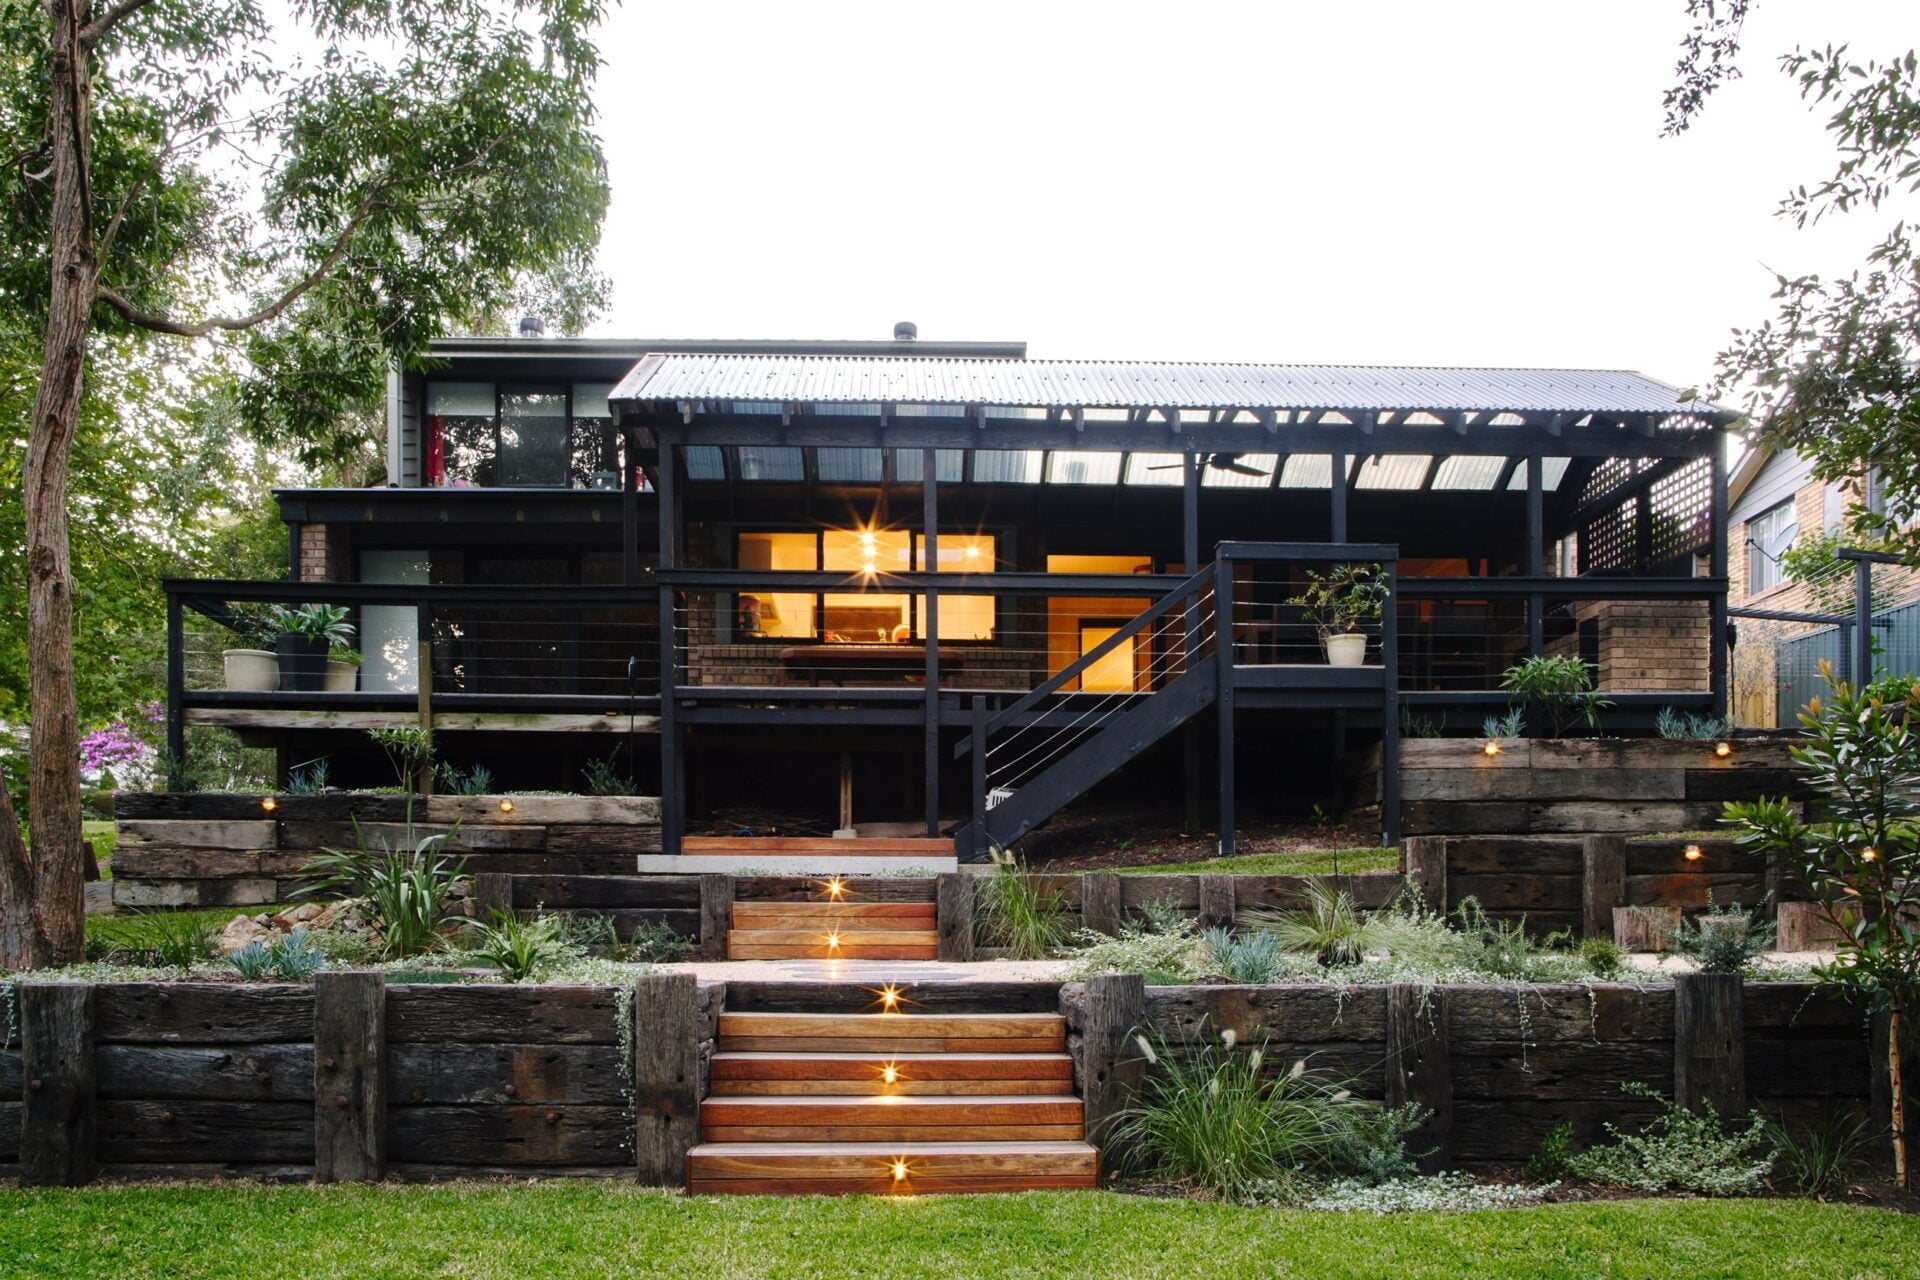 Terraced back yard with recycled timber beams and lighted walkway